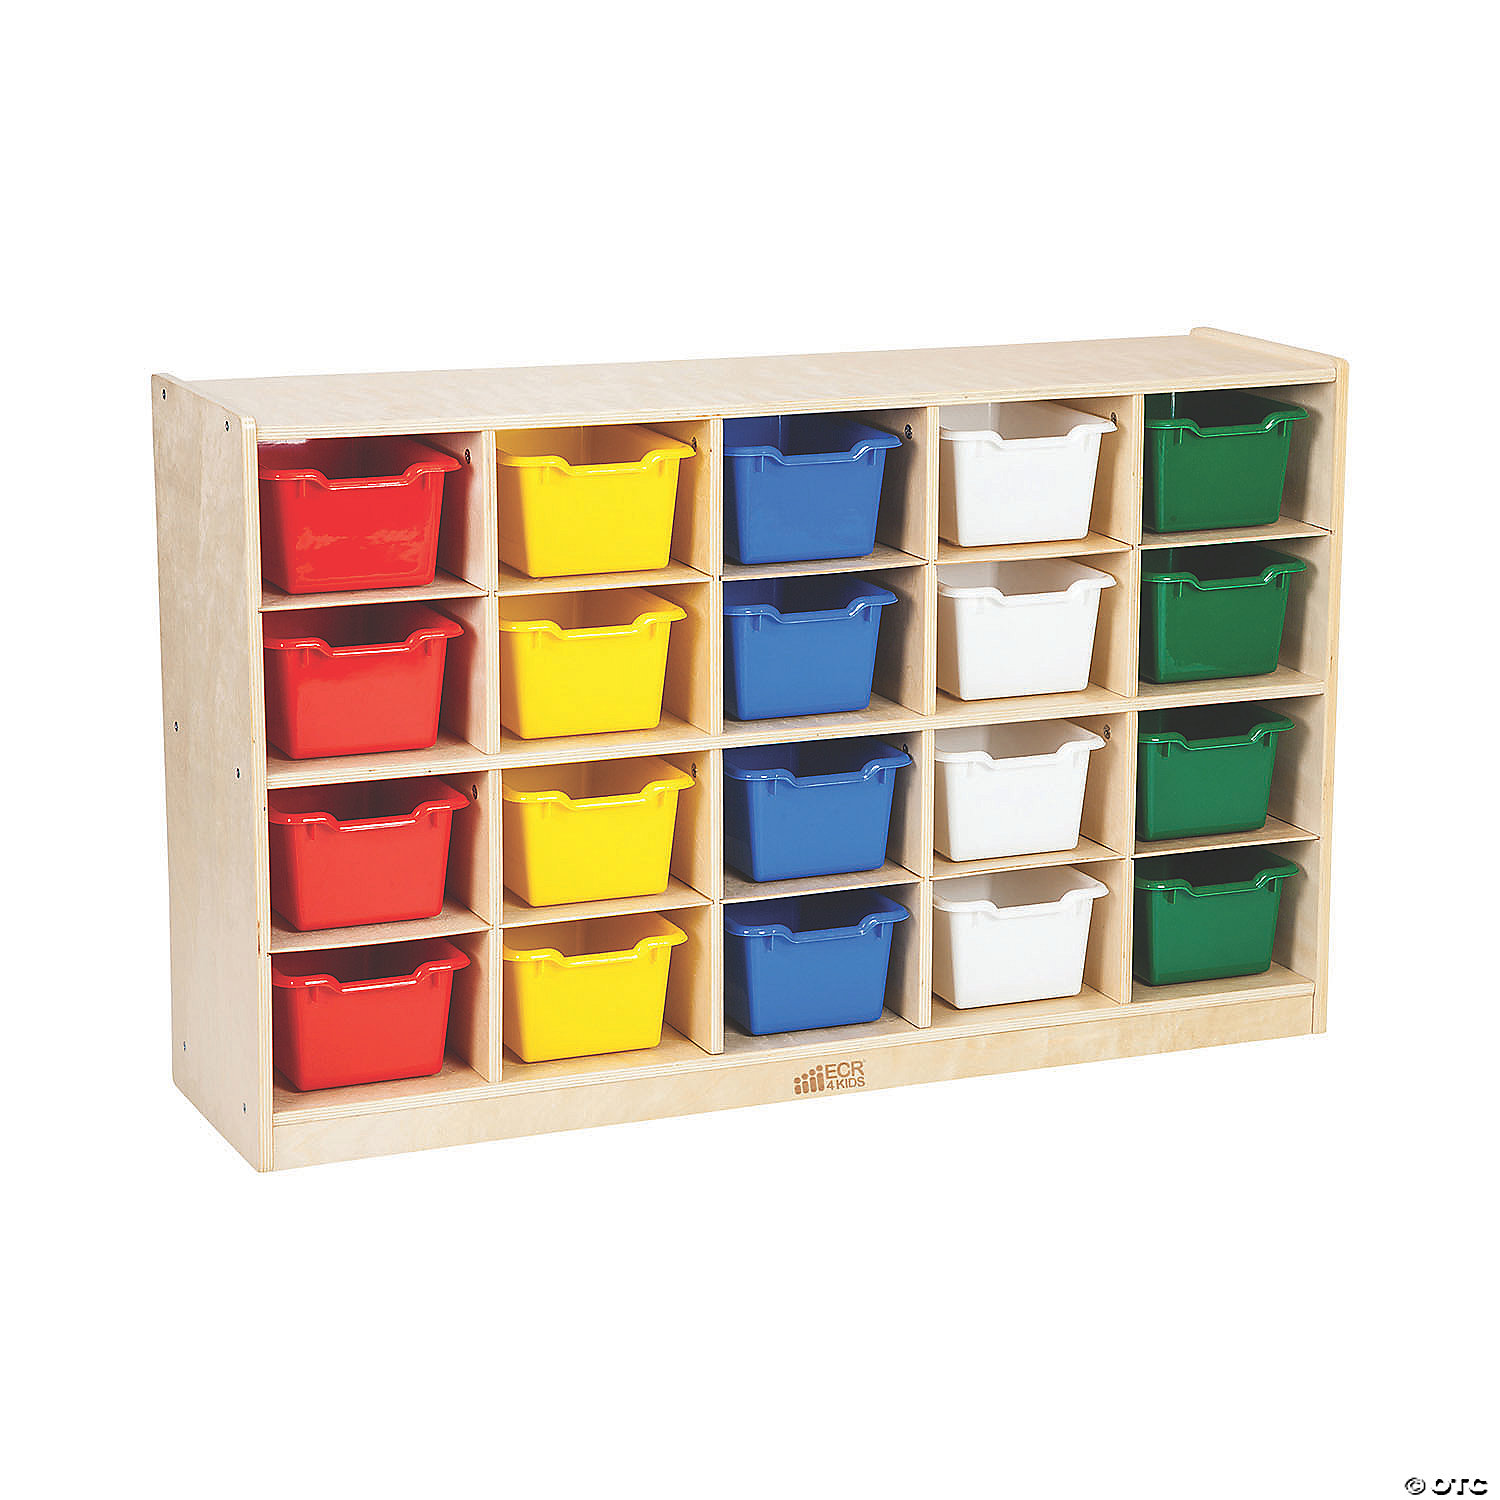 ELR-0426-AS Birch 20 Cubby Tray Cabinet with Bins